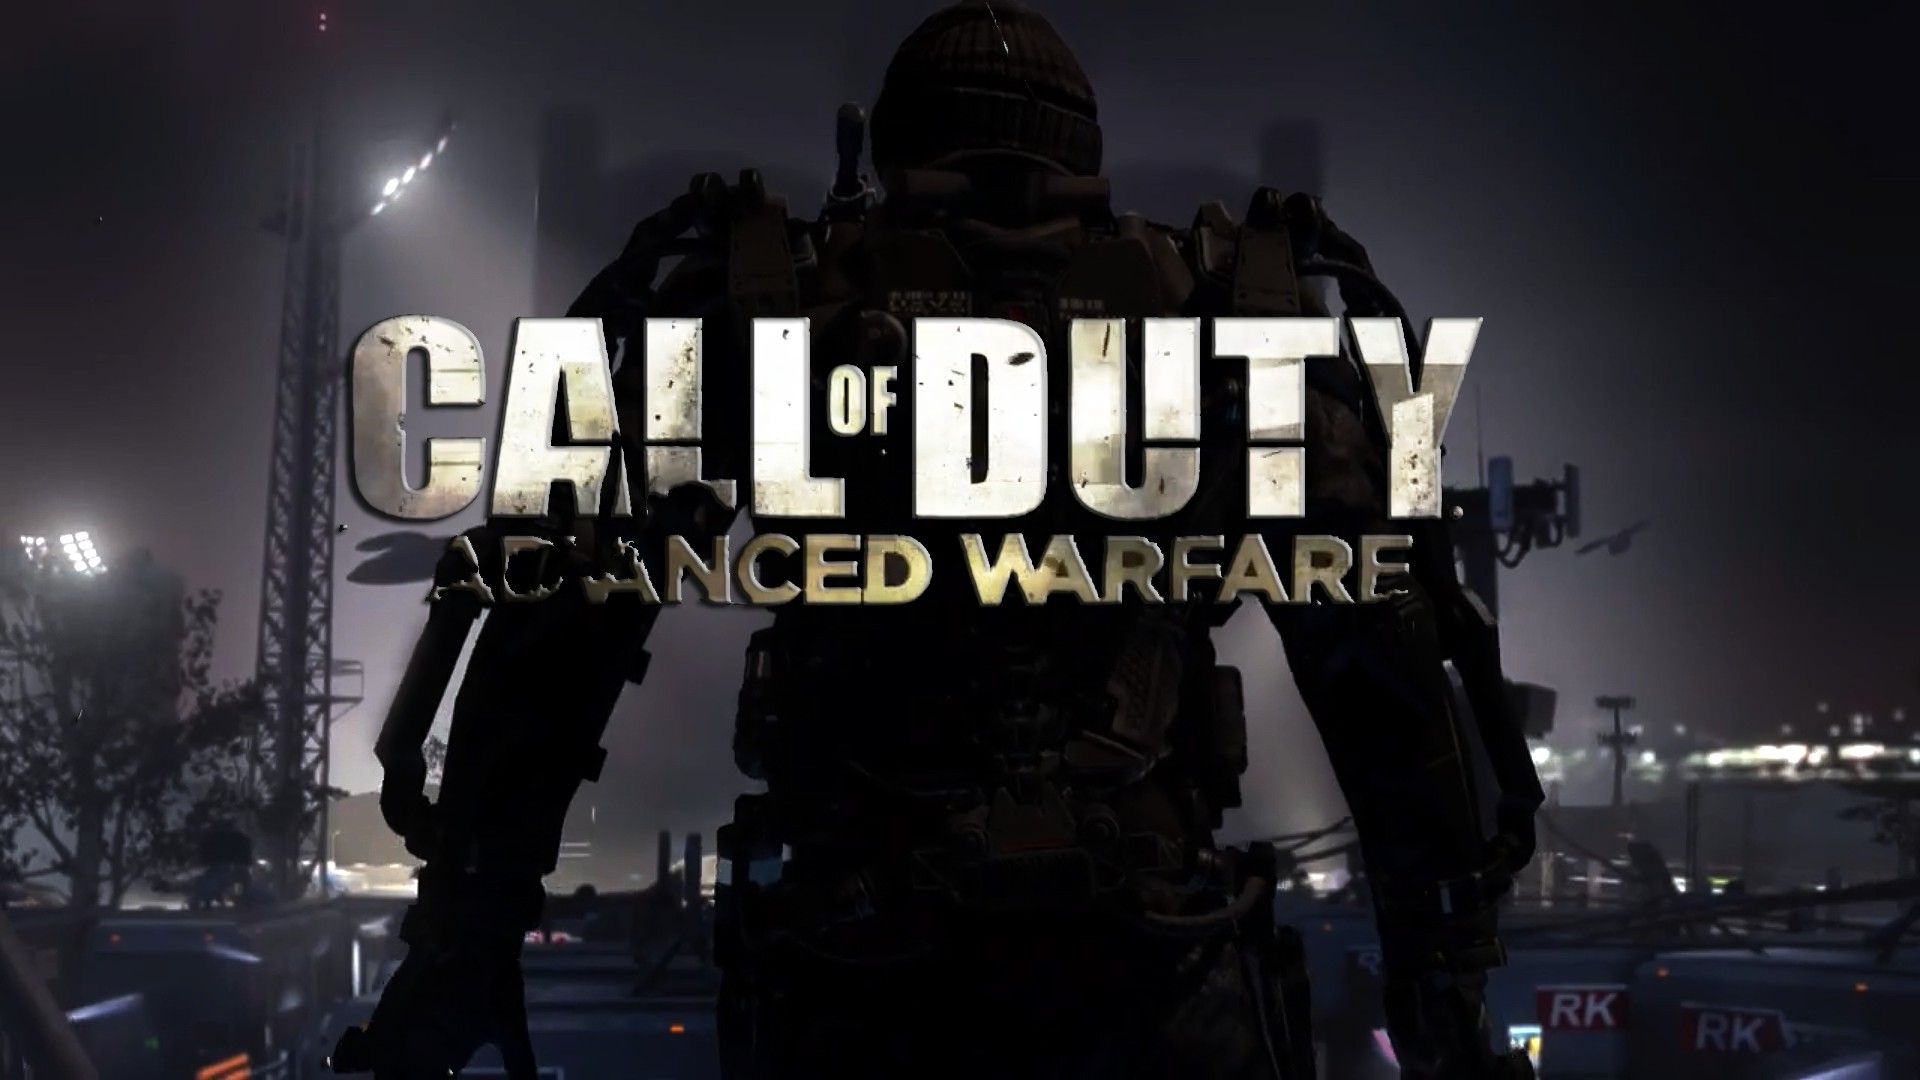 Remarkable Call Of Duty Advanced Warfare Wallpaper iPhone